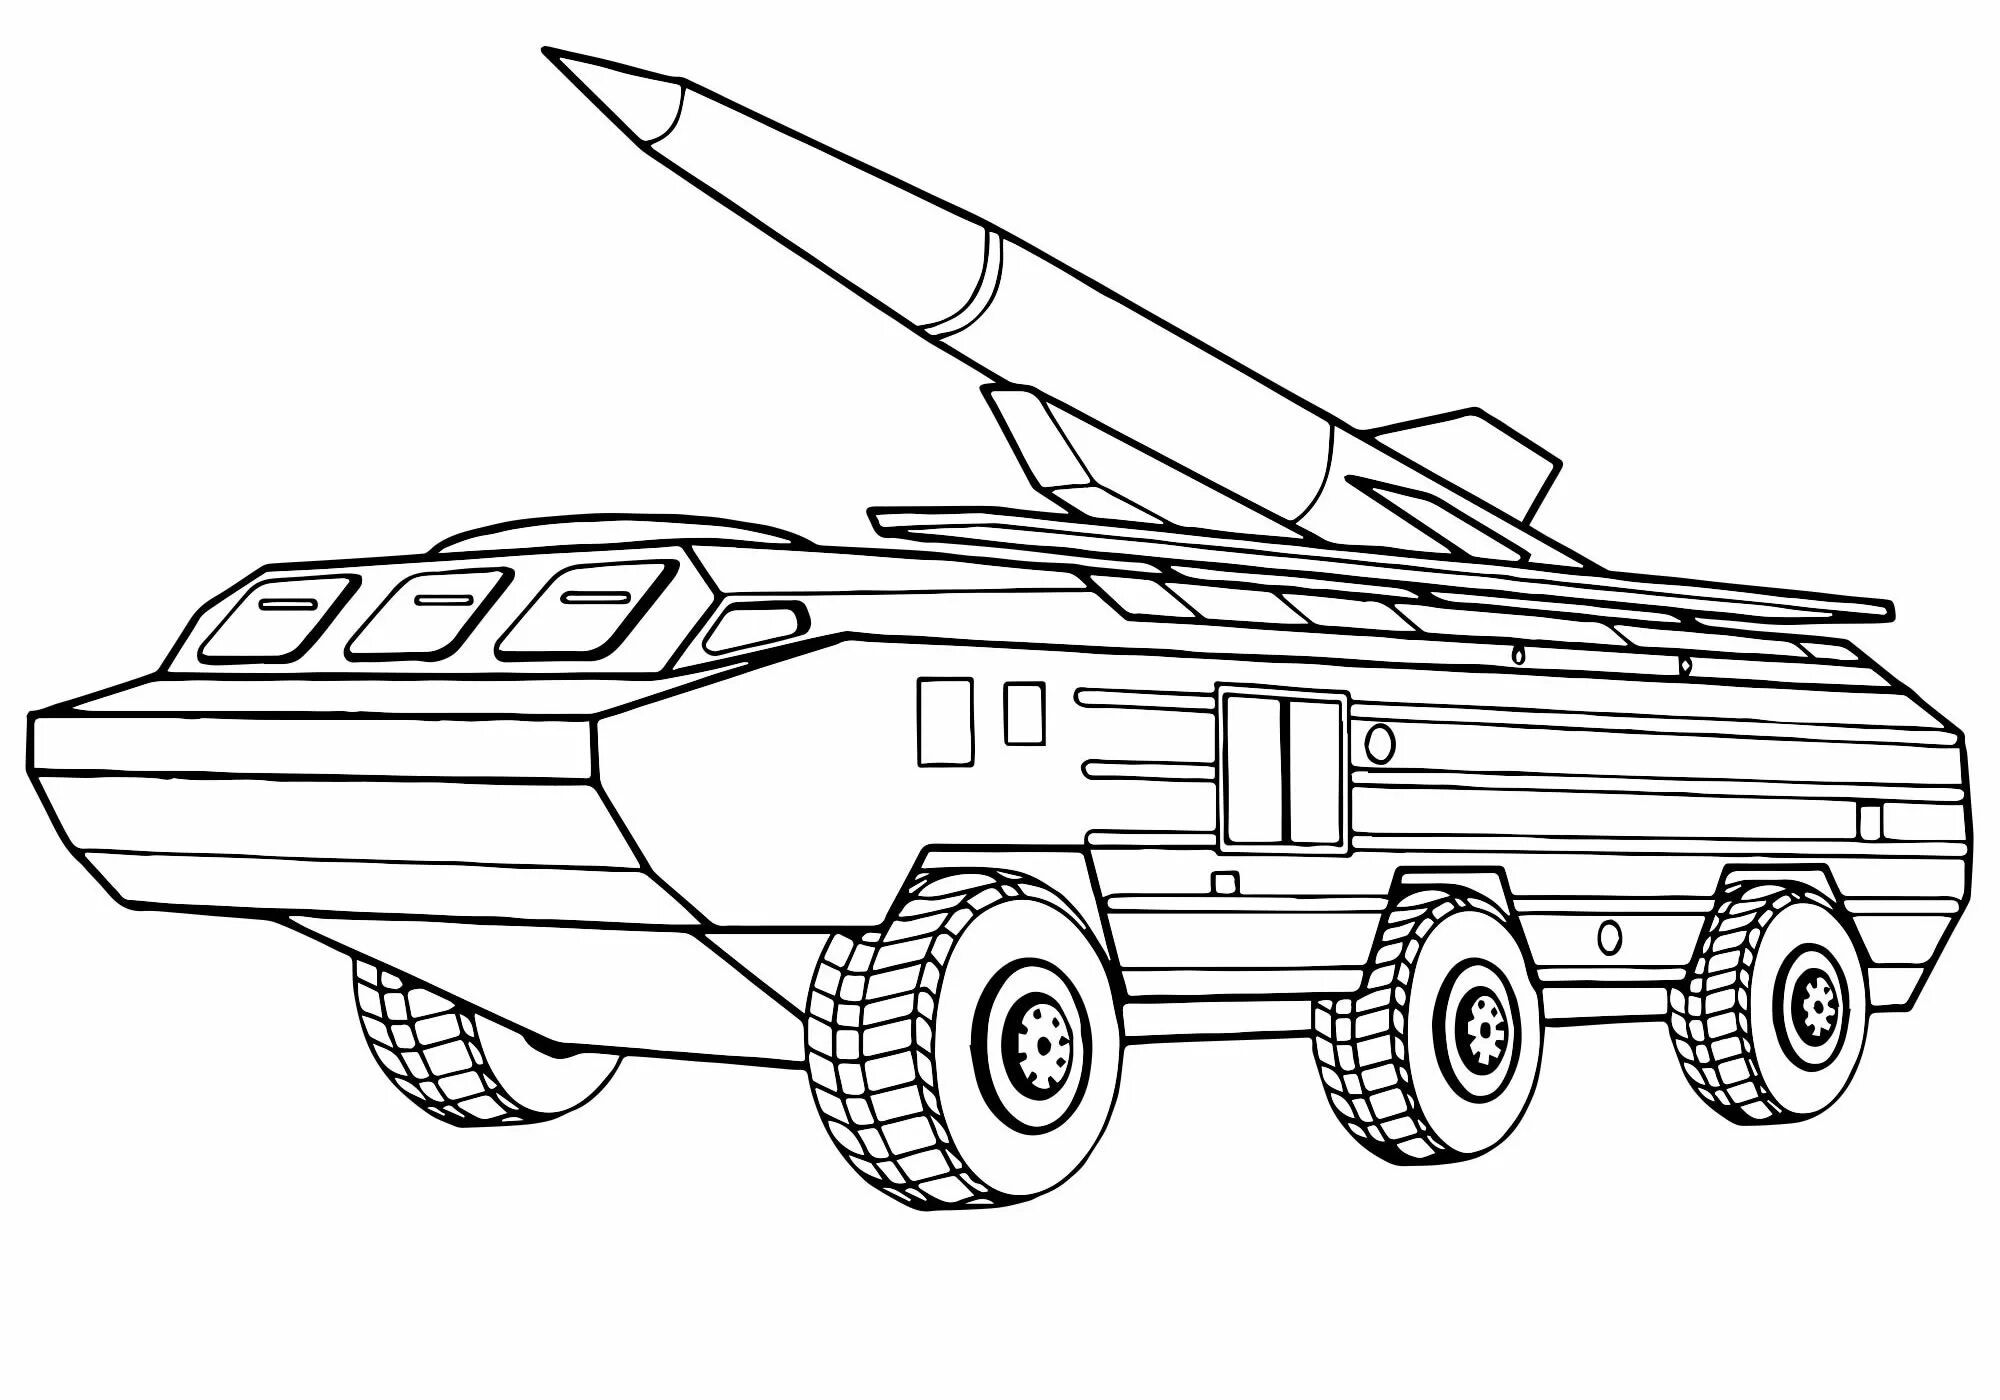 Fun coloring pages of Russian military equipment for kids